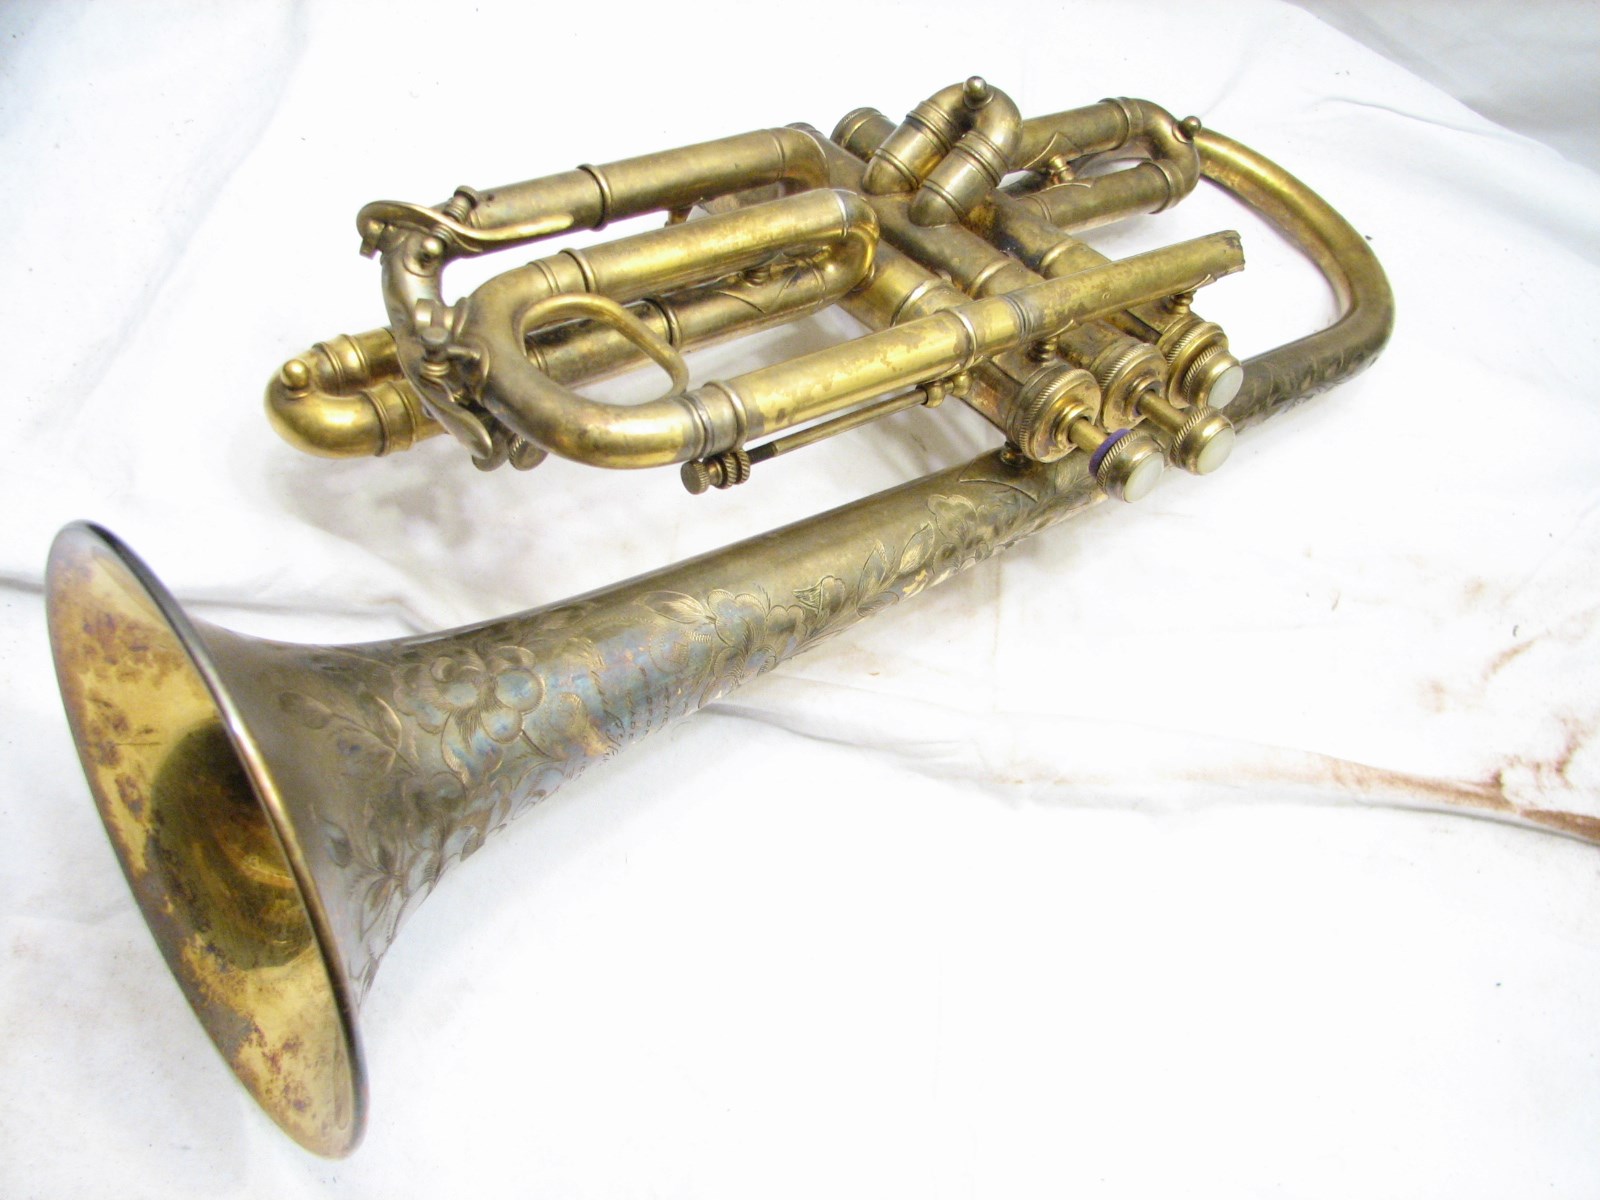 holton cornet serial numbers